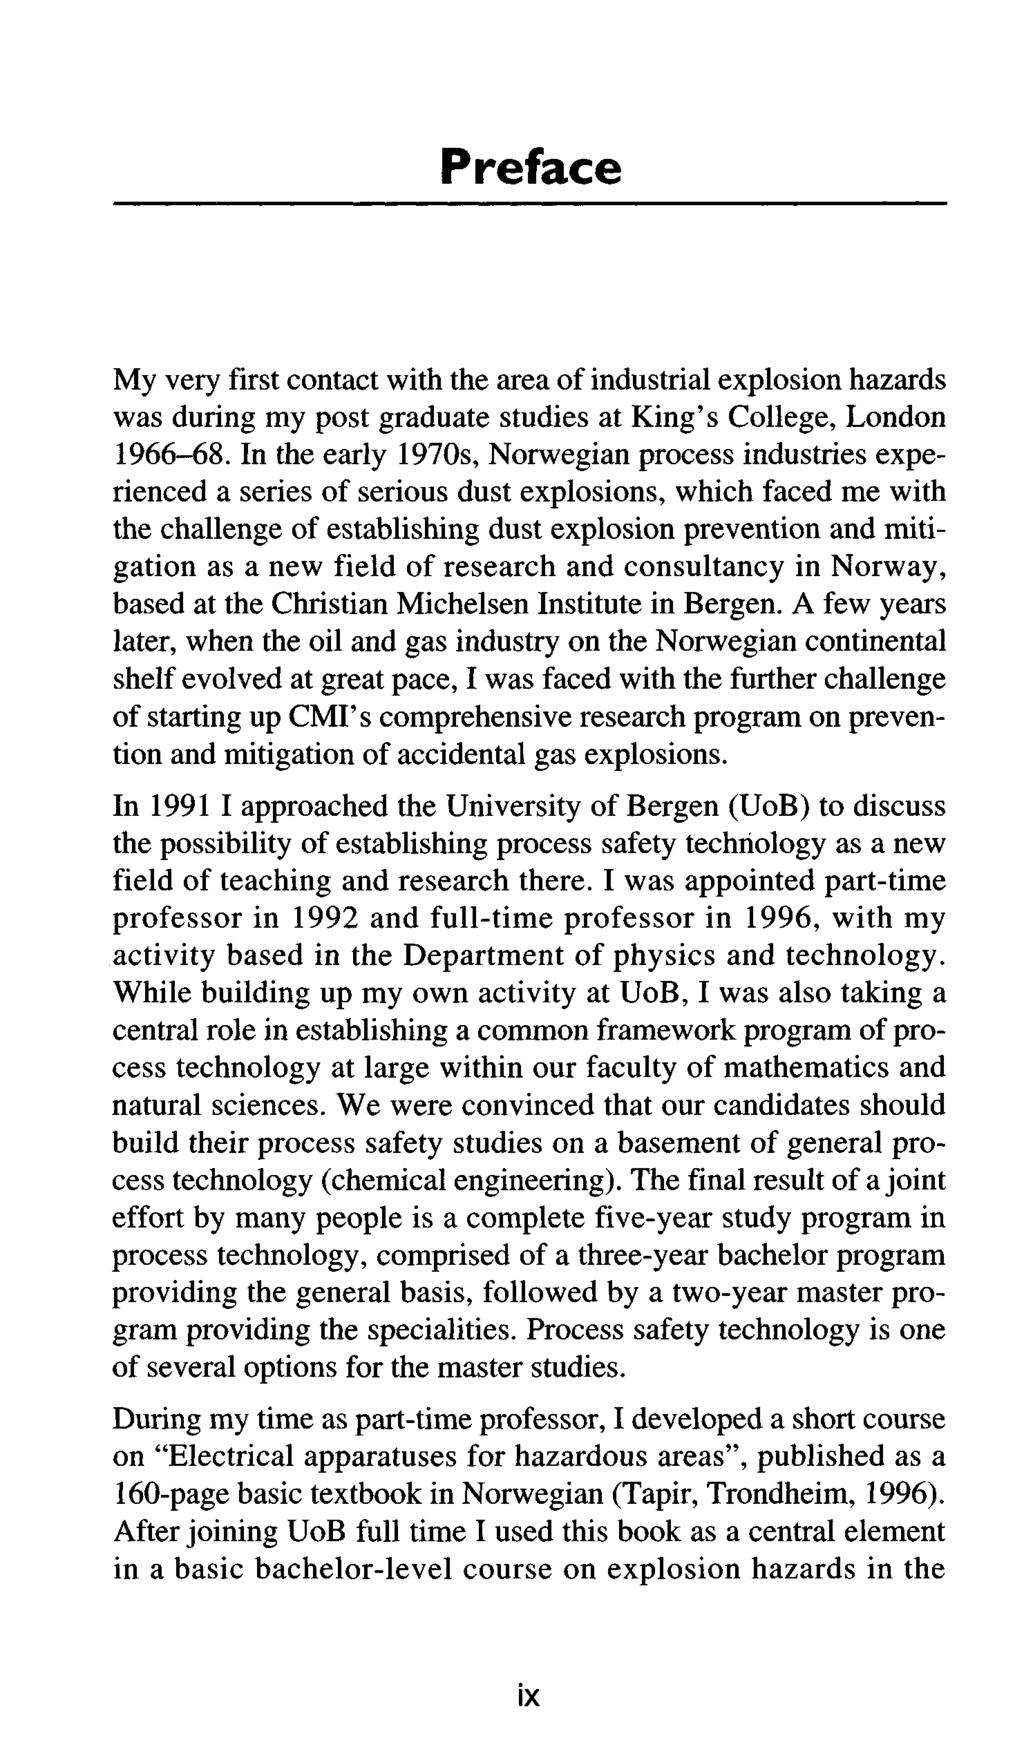 Preface My very first contact with the area of industrial explosion hazards was during my post graduate studies at King's College, London 1966-68.